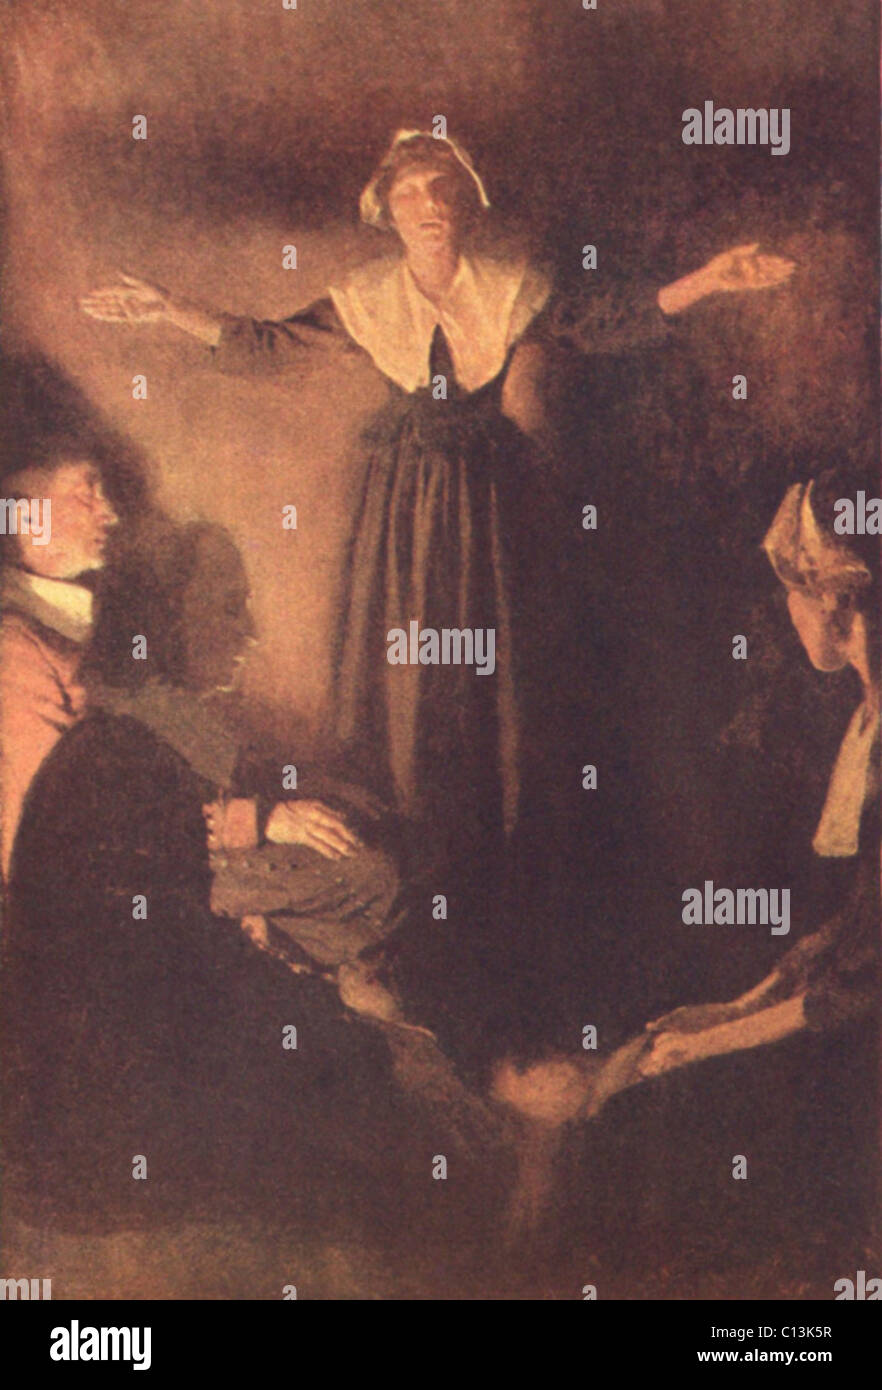 Salem Witch Trials. Salem magistrates examine of Rebecca Nurse, who pleaded innocent of using witchcraft to torment her young accusers: Ann Putmann and Abigail Williams, Elizabeth Hubbard and Mary Walcott. Rebecca was one of nineteen eventually executed for witchcraft in Massachusetts Colony in 1692. Illustration by Howard Pyle. Stock Photo